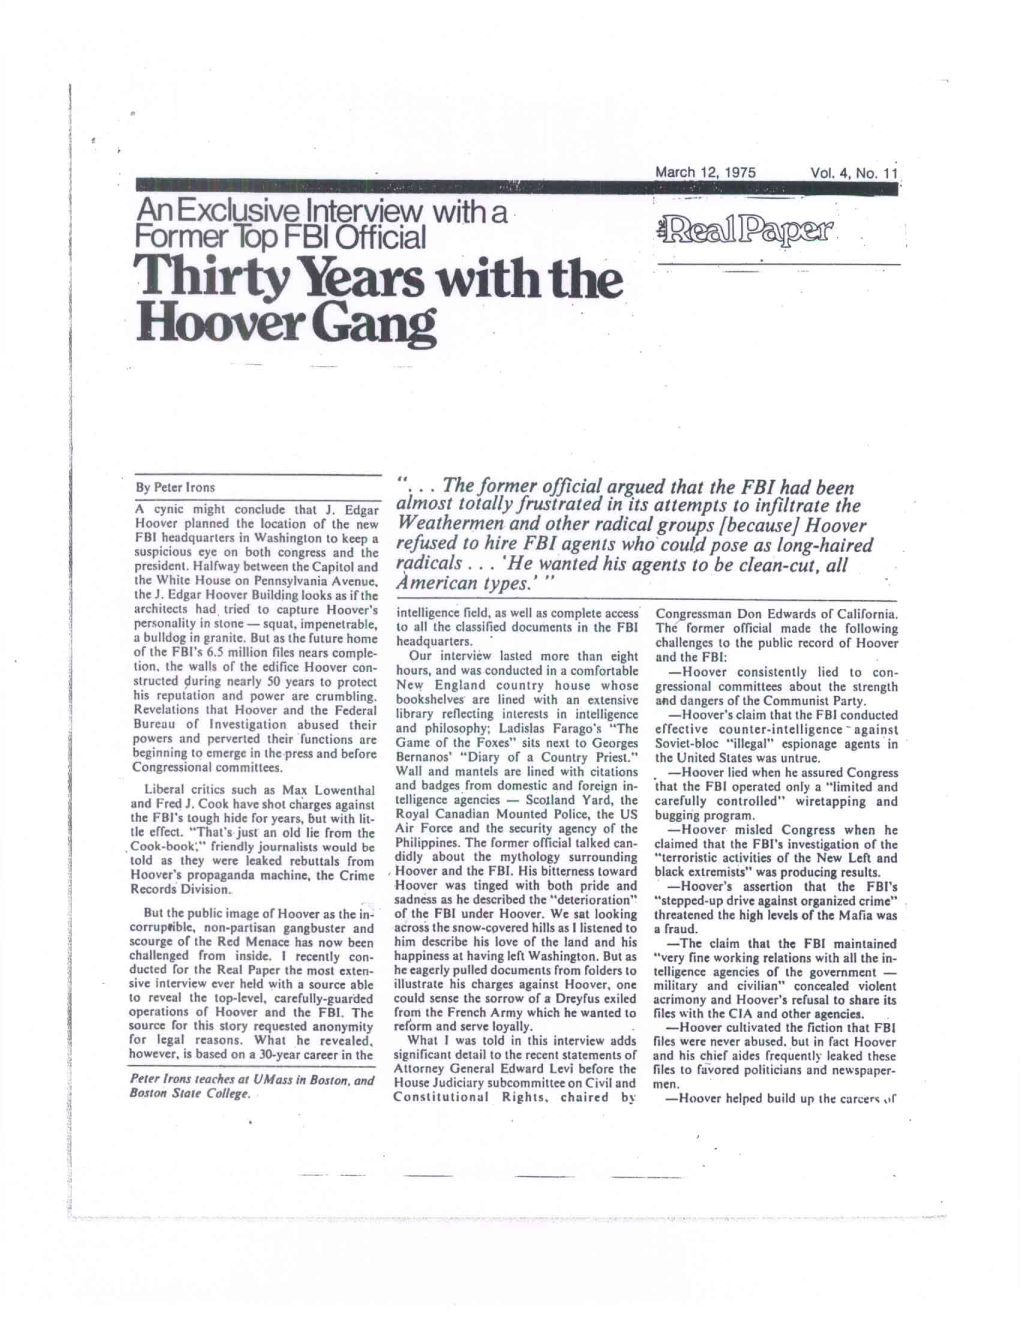 Thirty Years with the Hoover Gang